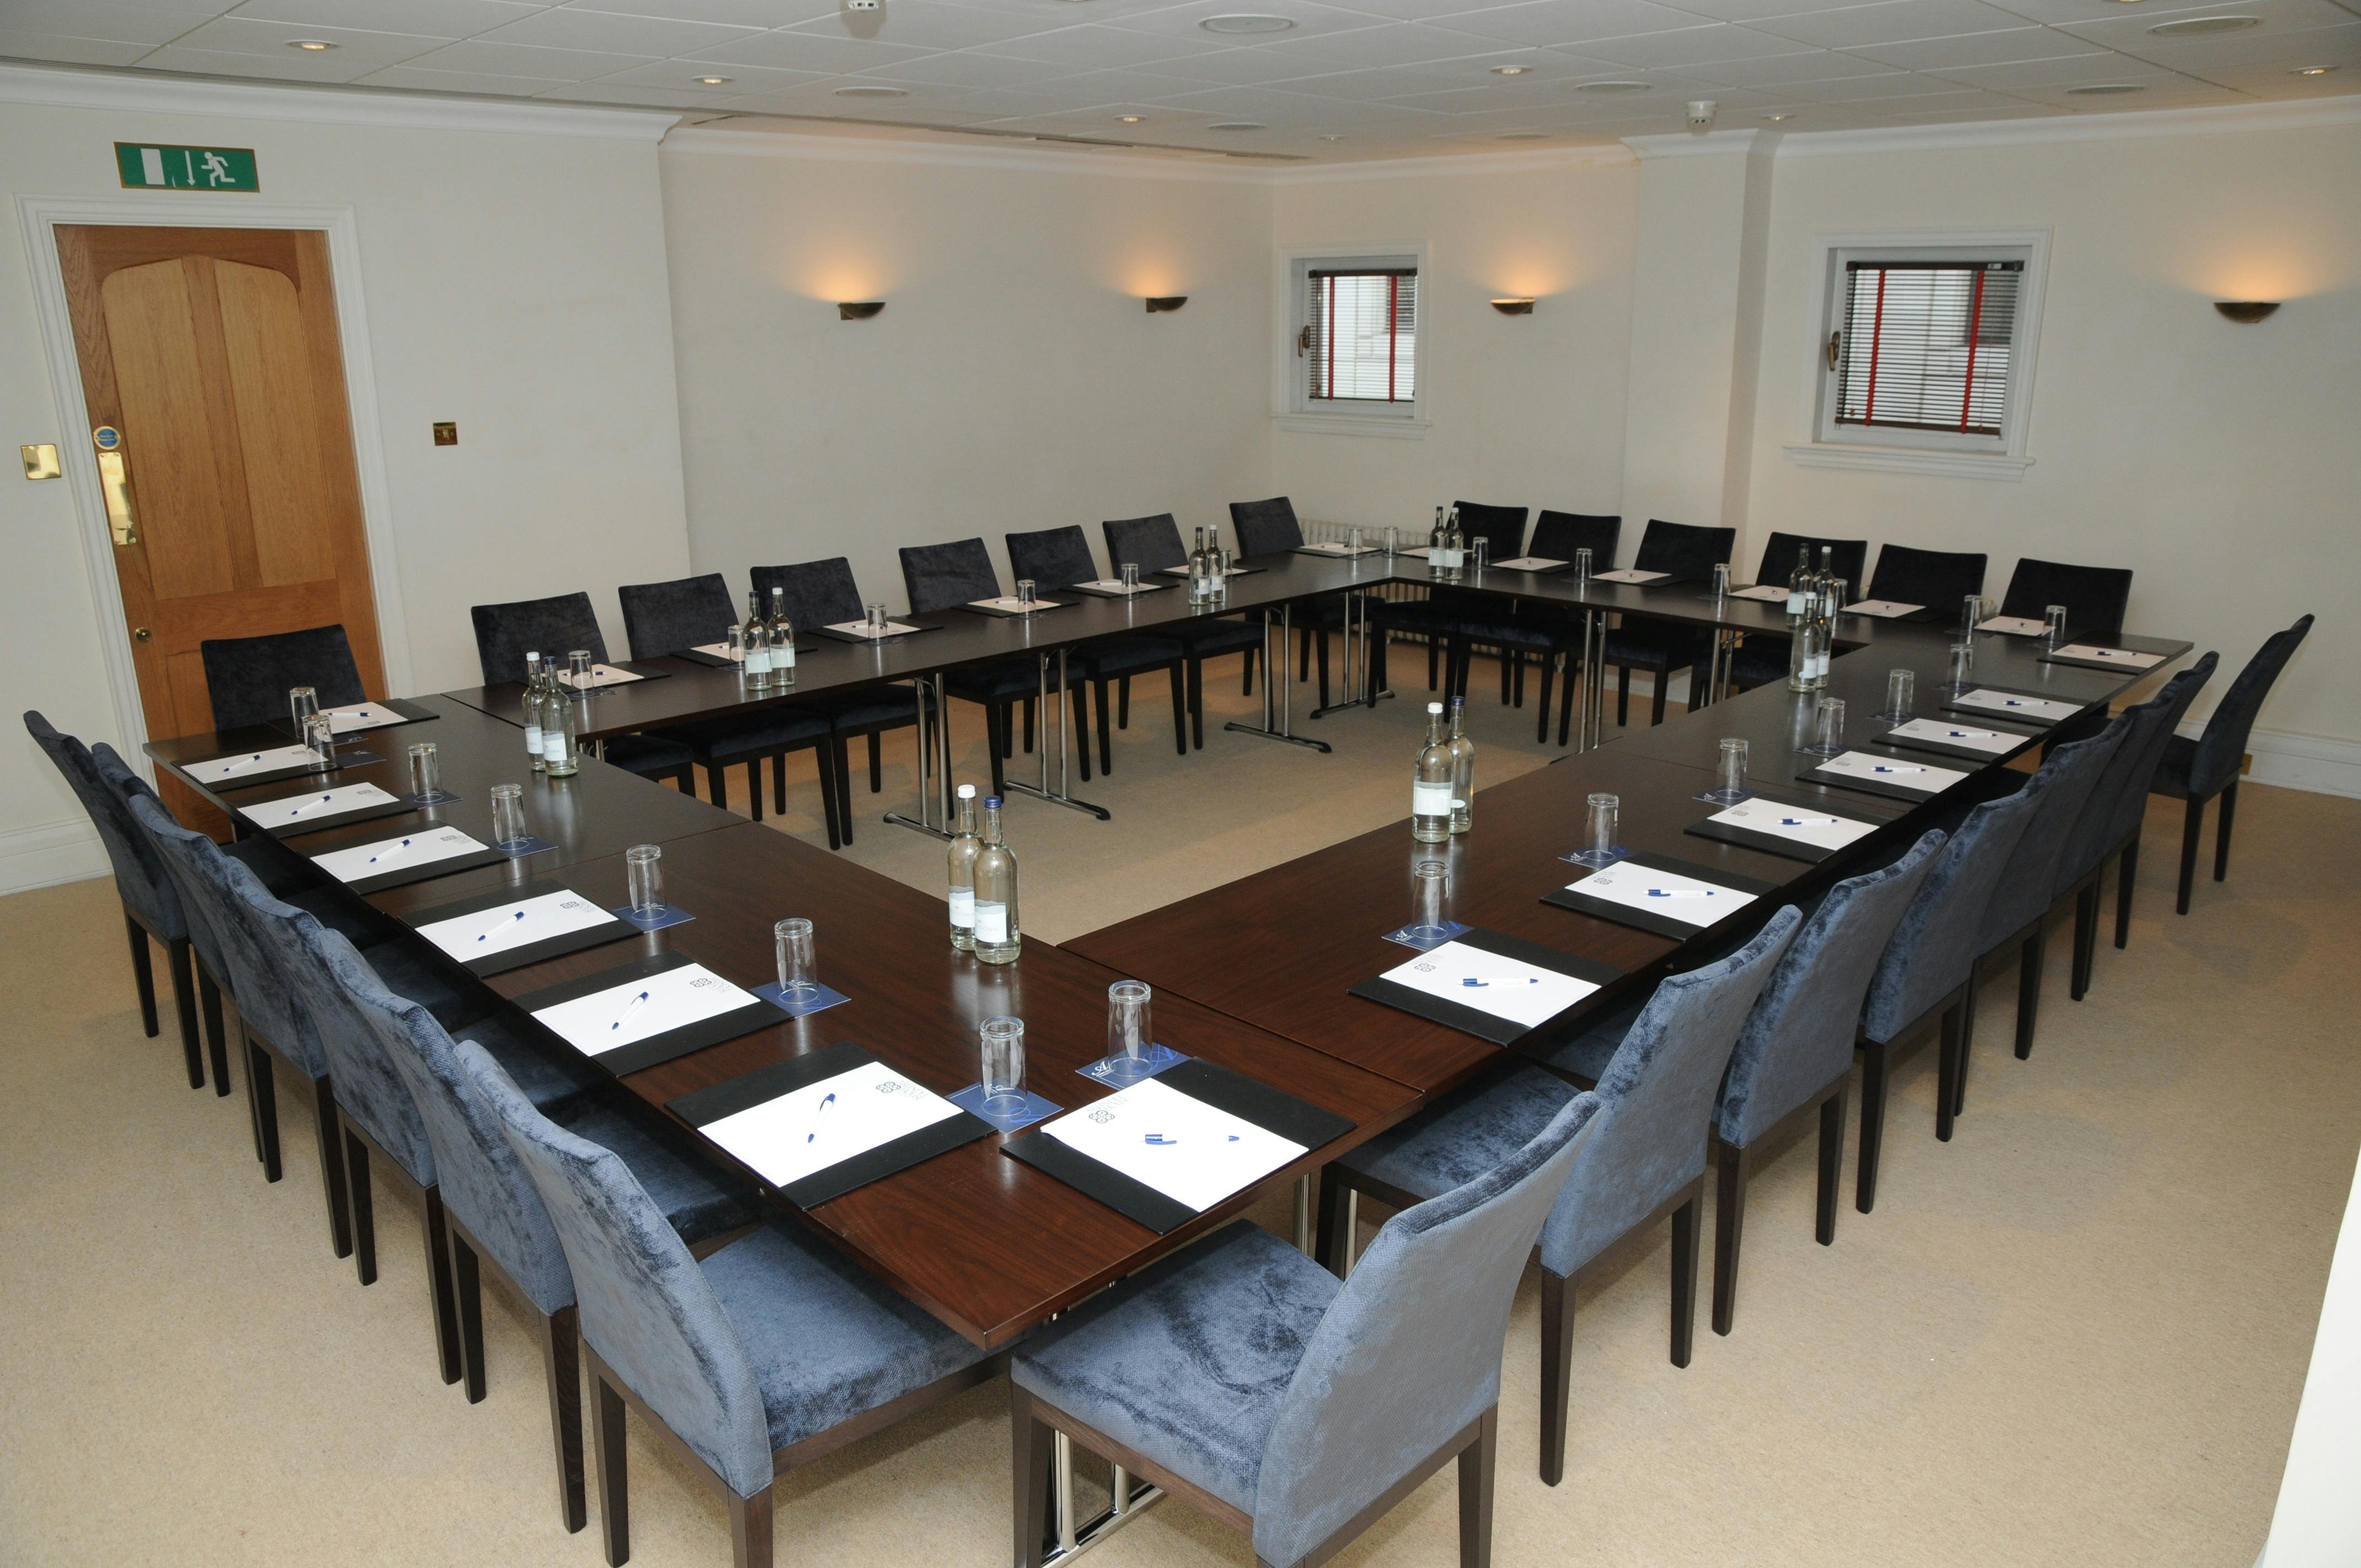 Arundel House - Council Room image 1